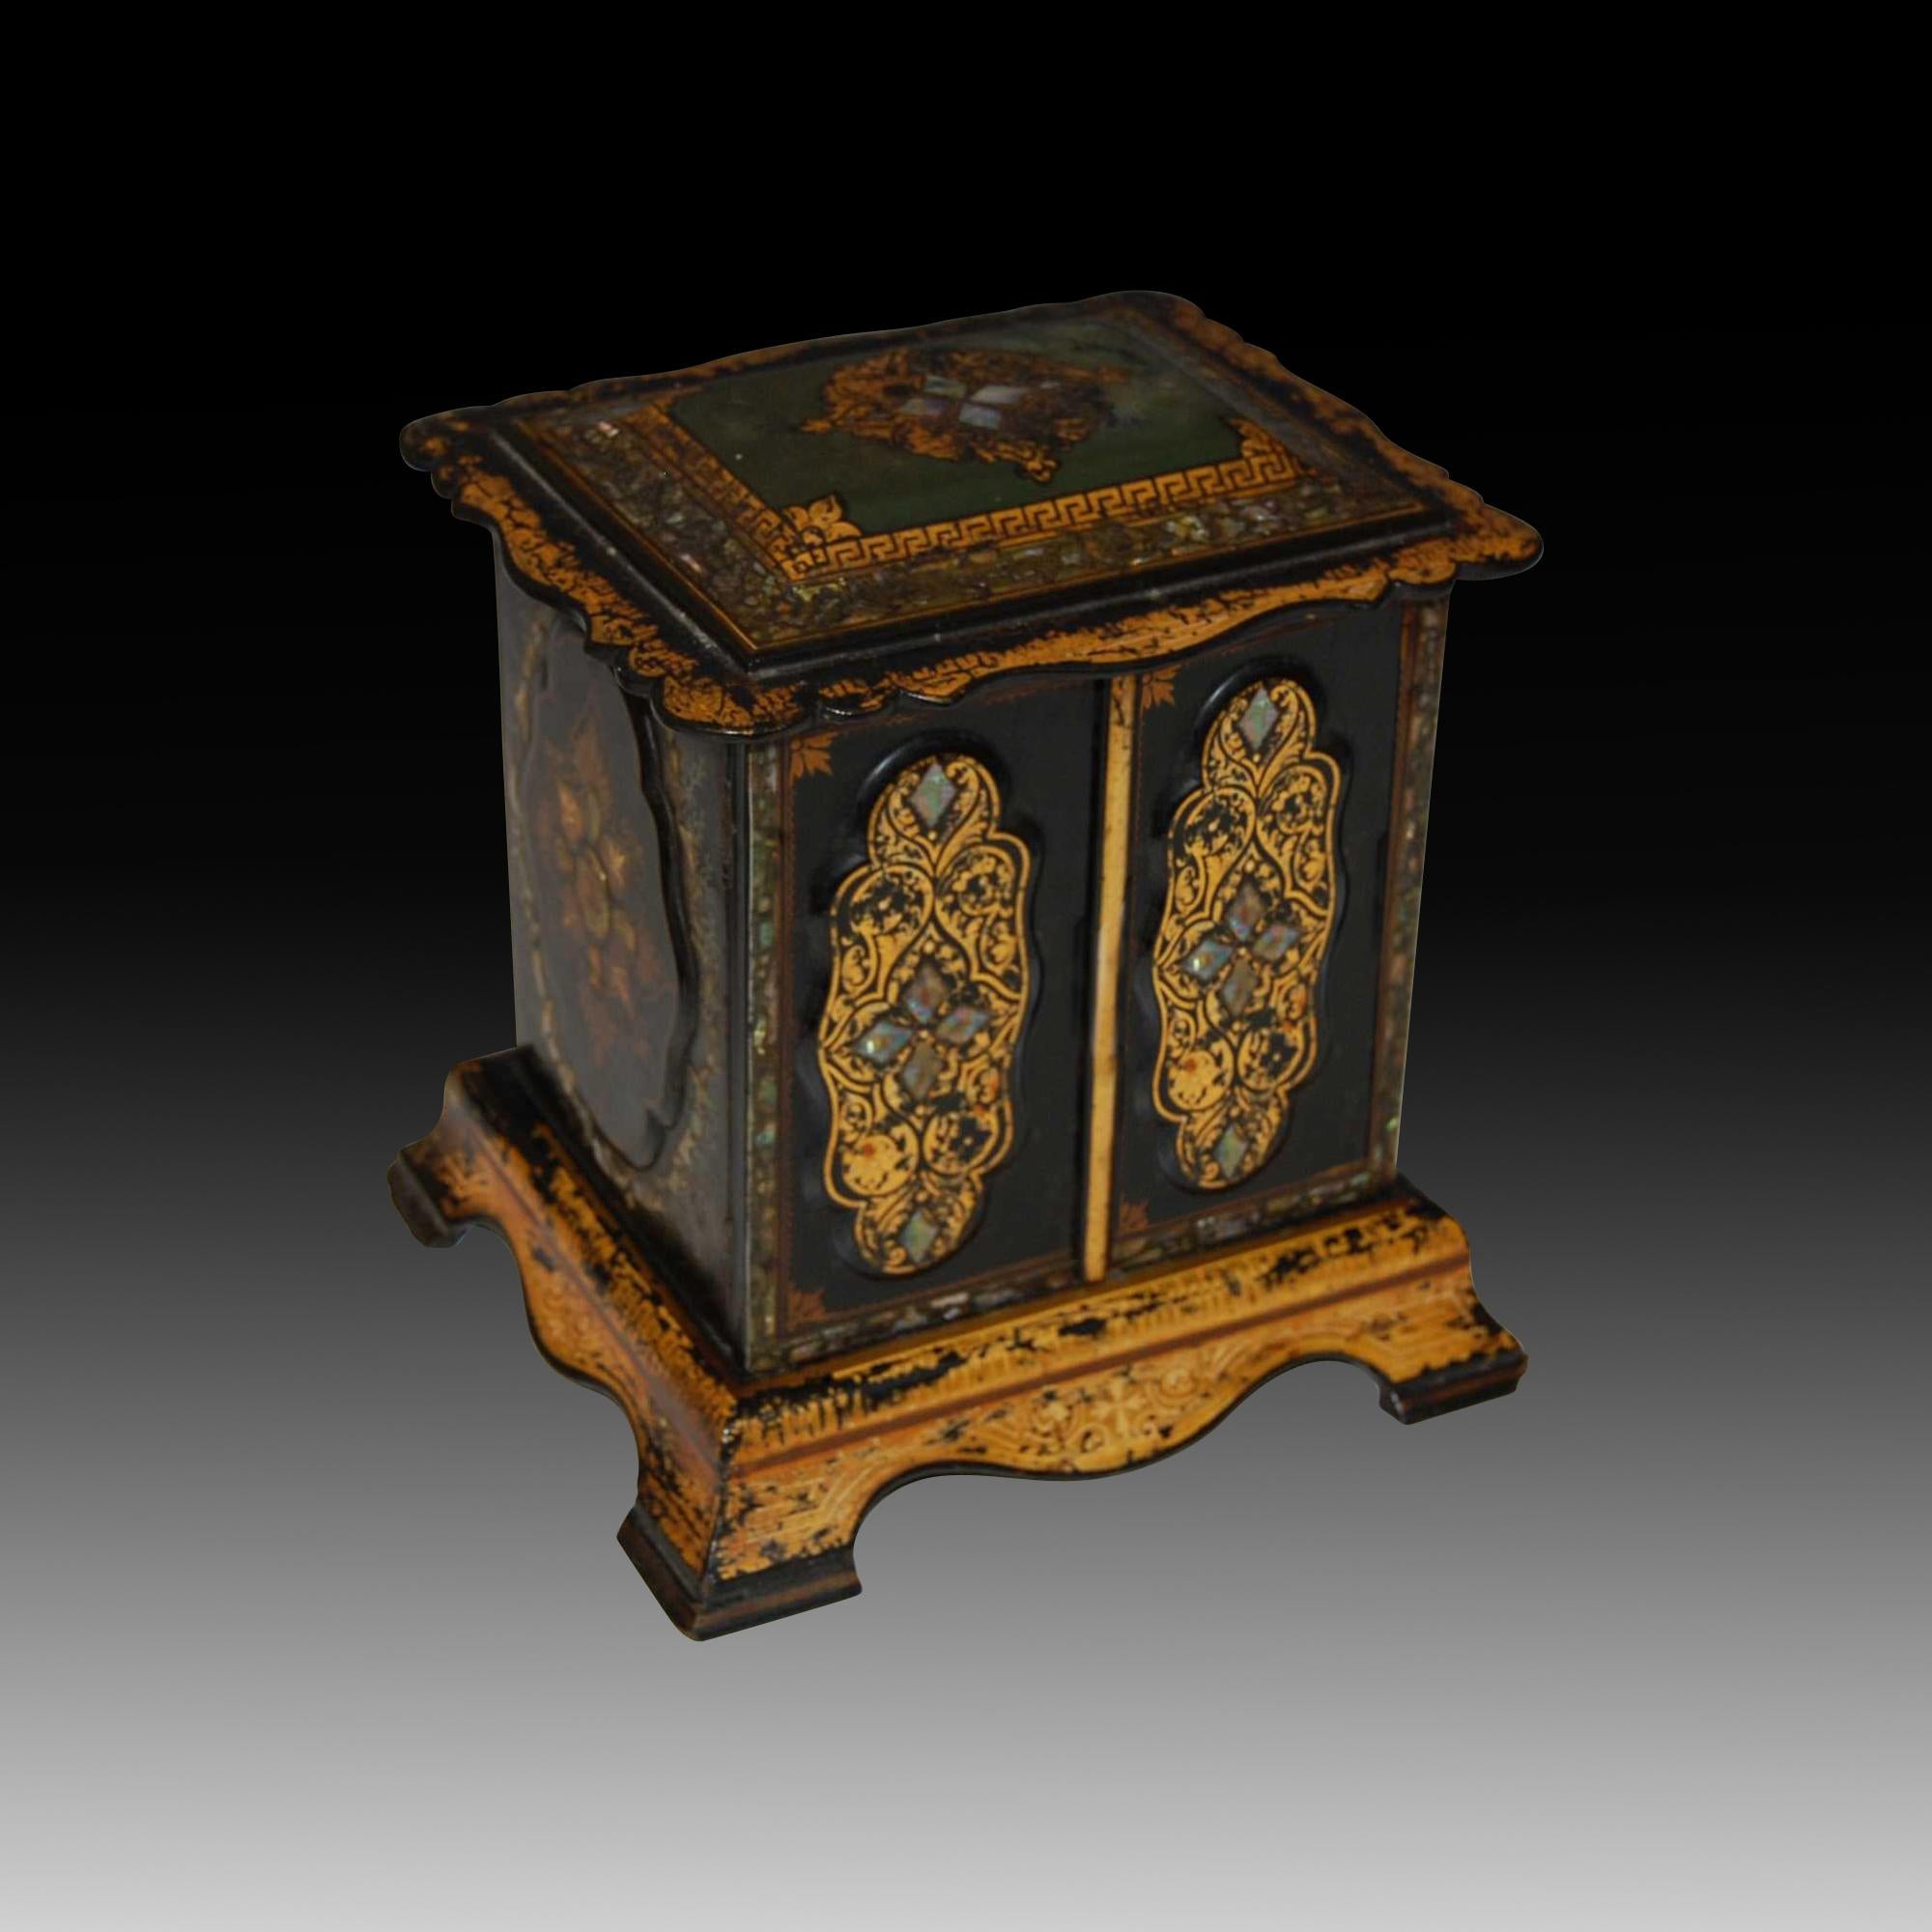 A Rare and Historic Mother-of-Pearl Inlaid Ebonised Papier Mâché Cabinet Used by Queen Victoria in 1849.
                                                                                                                                                